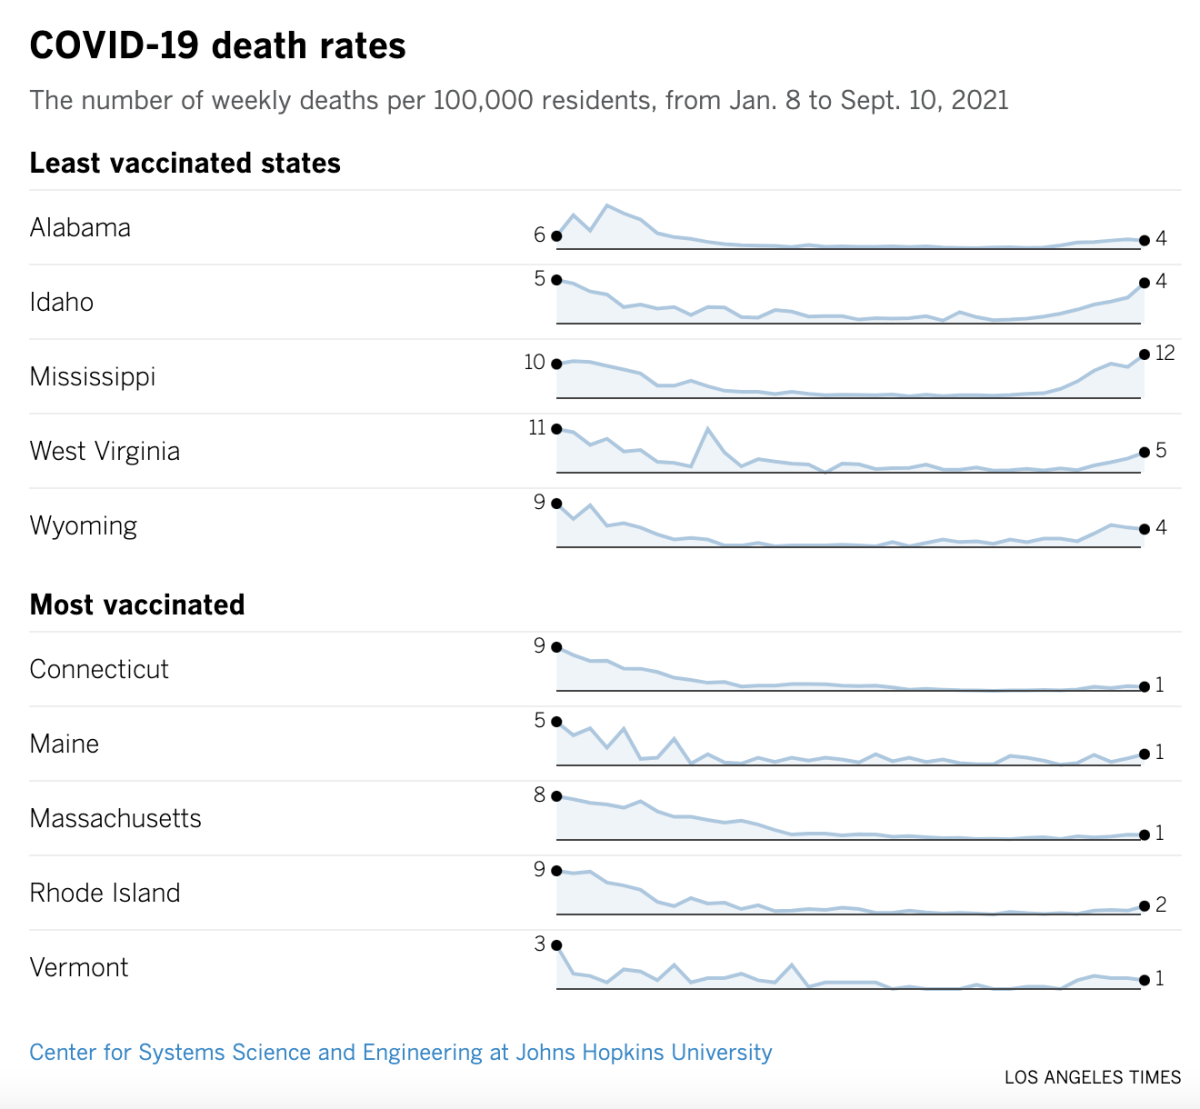 A chart comparing COVID-19 death rates over time in 10 states.